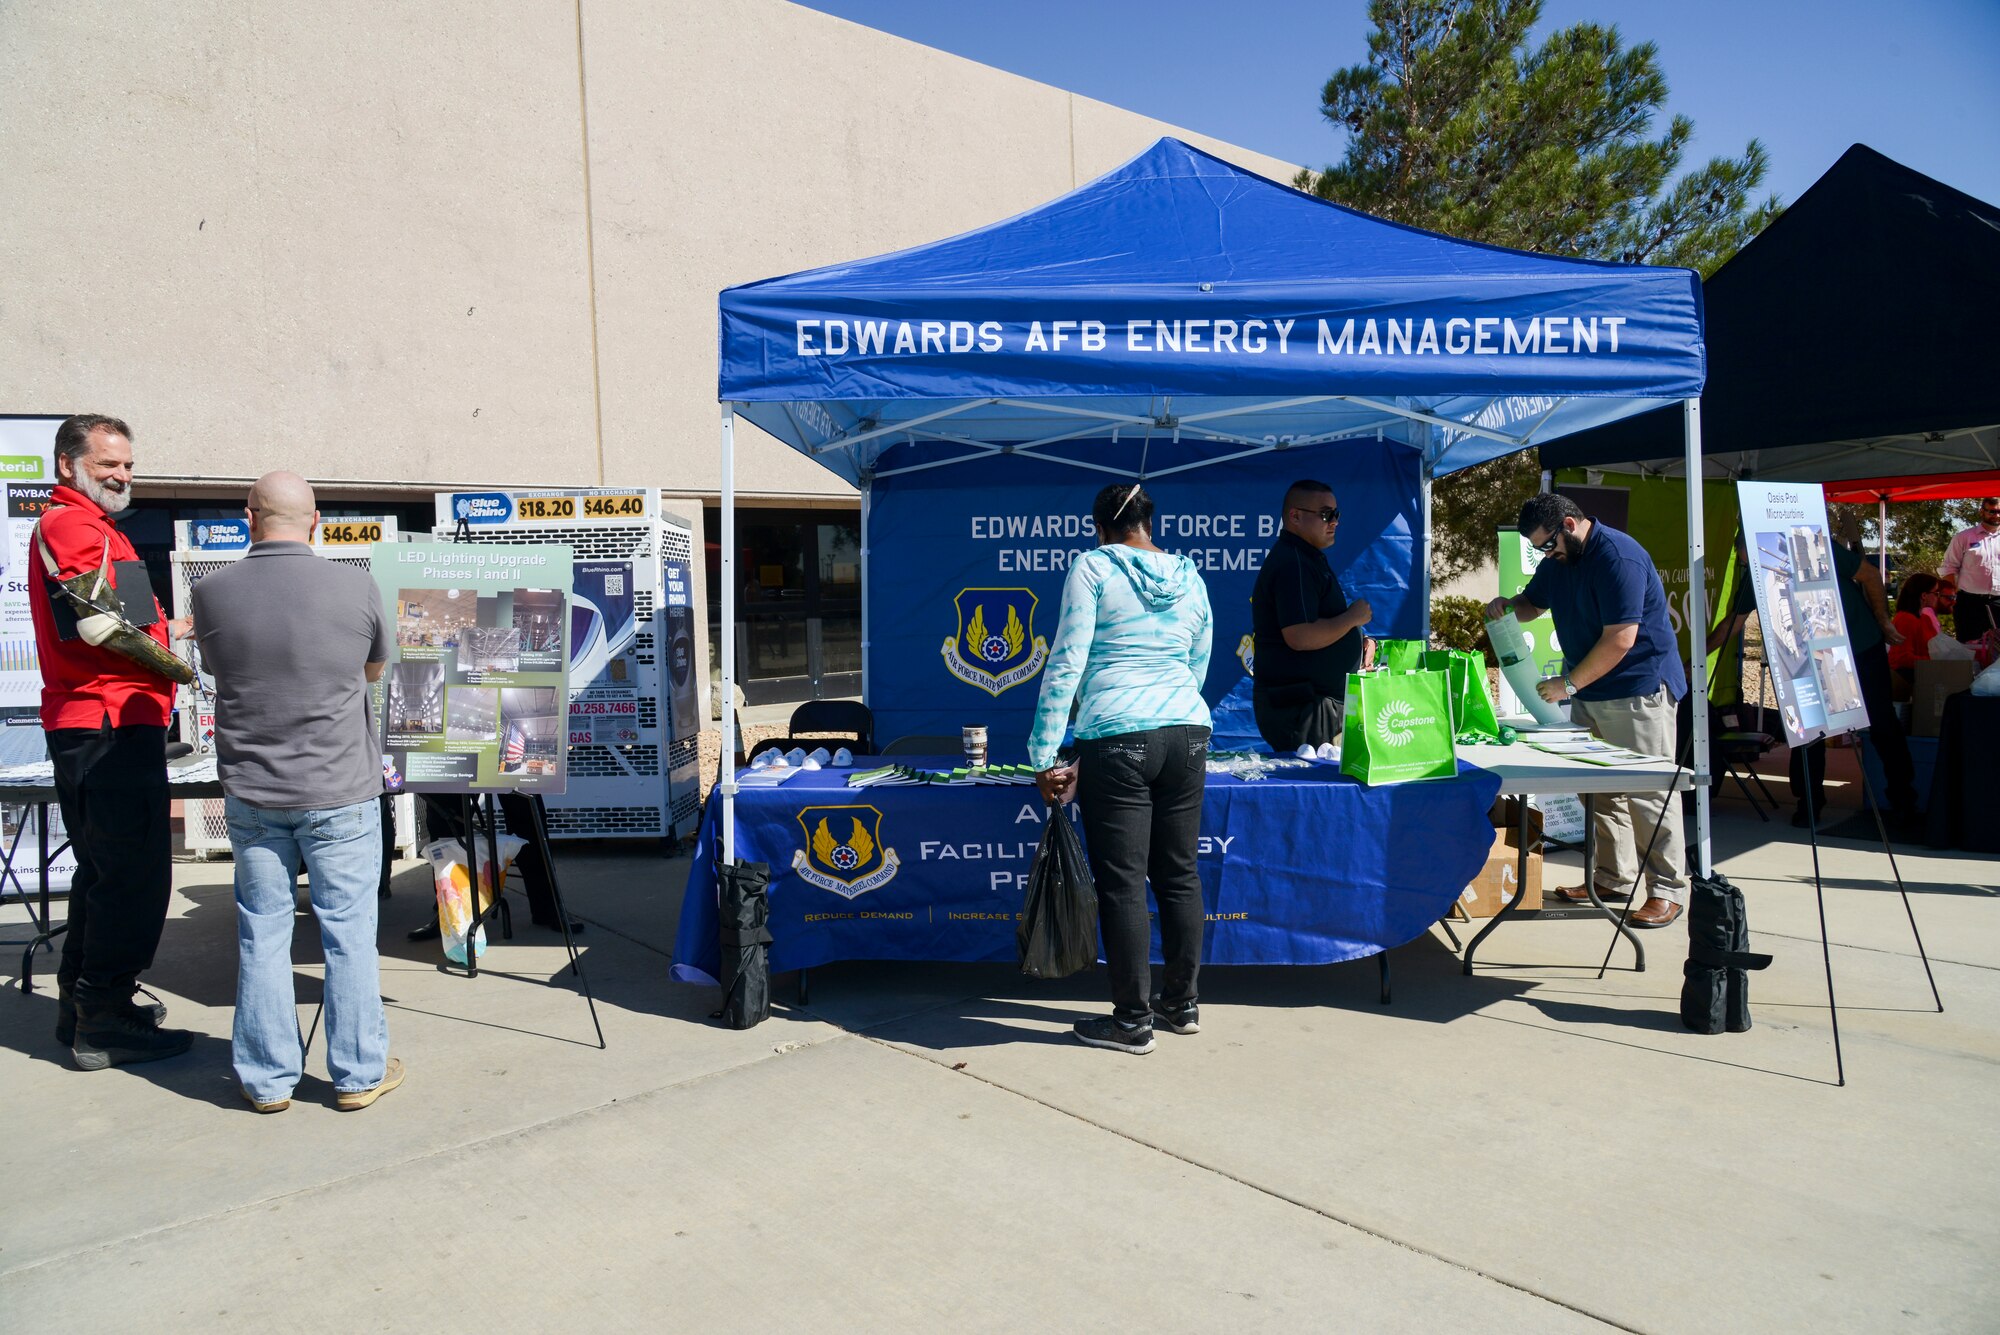 Members of the Edwards Air Force Base Energy Management Section hosts the Energy Action Month event at the Base Exchange on Edwards Air Force Base, California, Oct. 17. (U.S. Air Force photo by Giancarlo Casem)